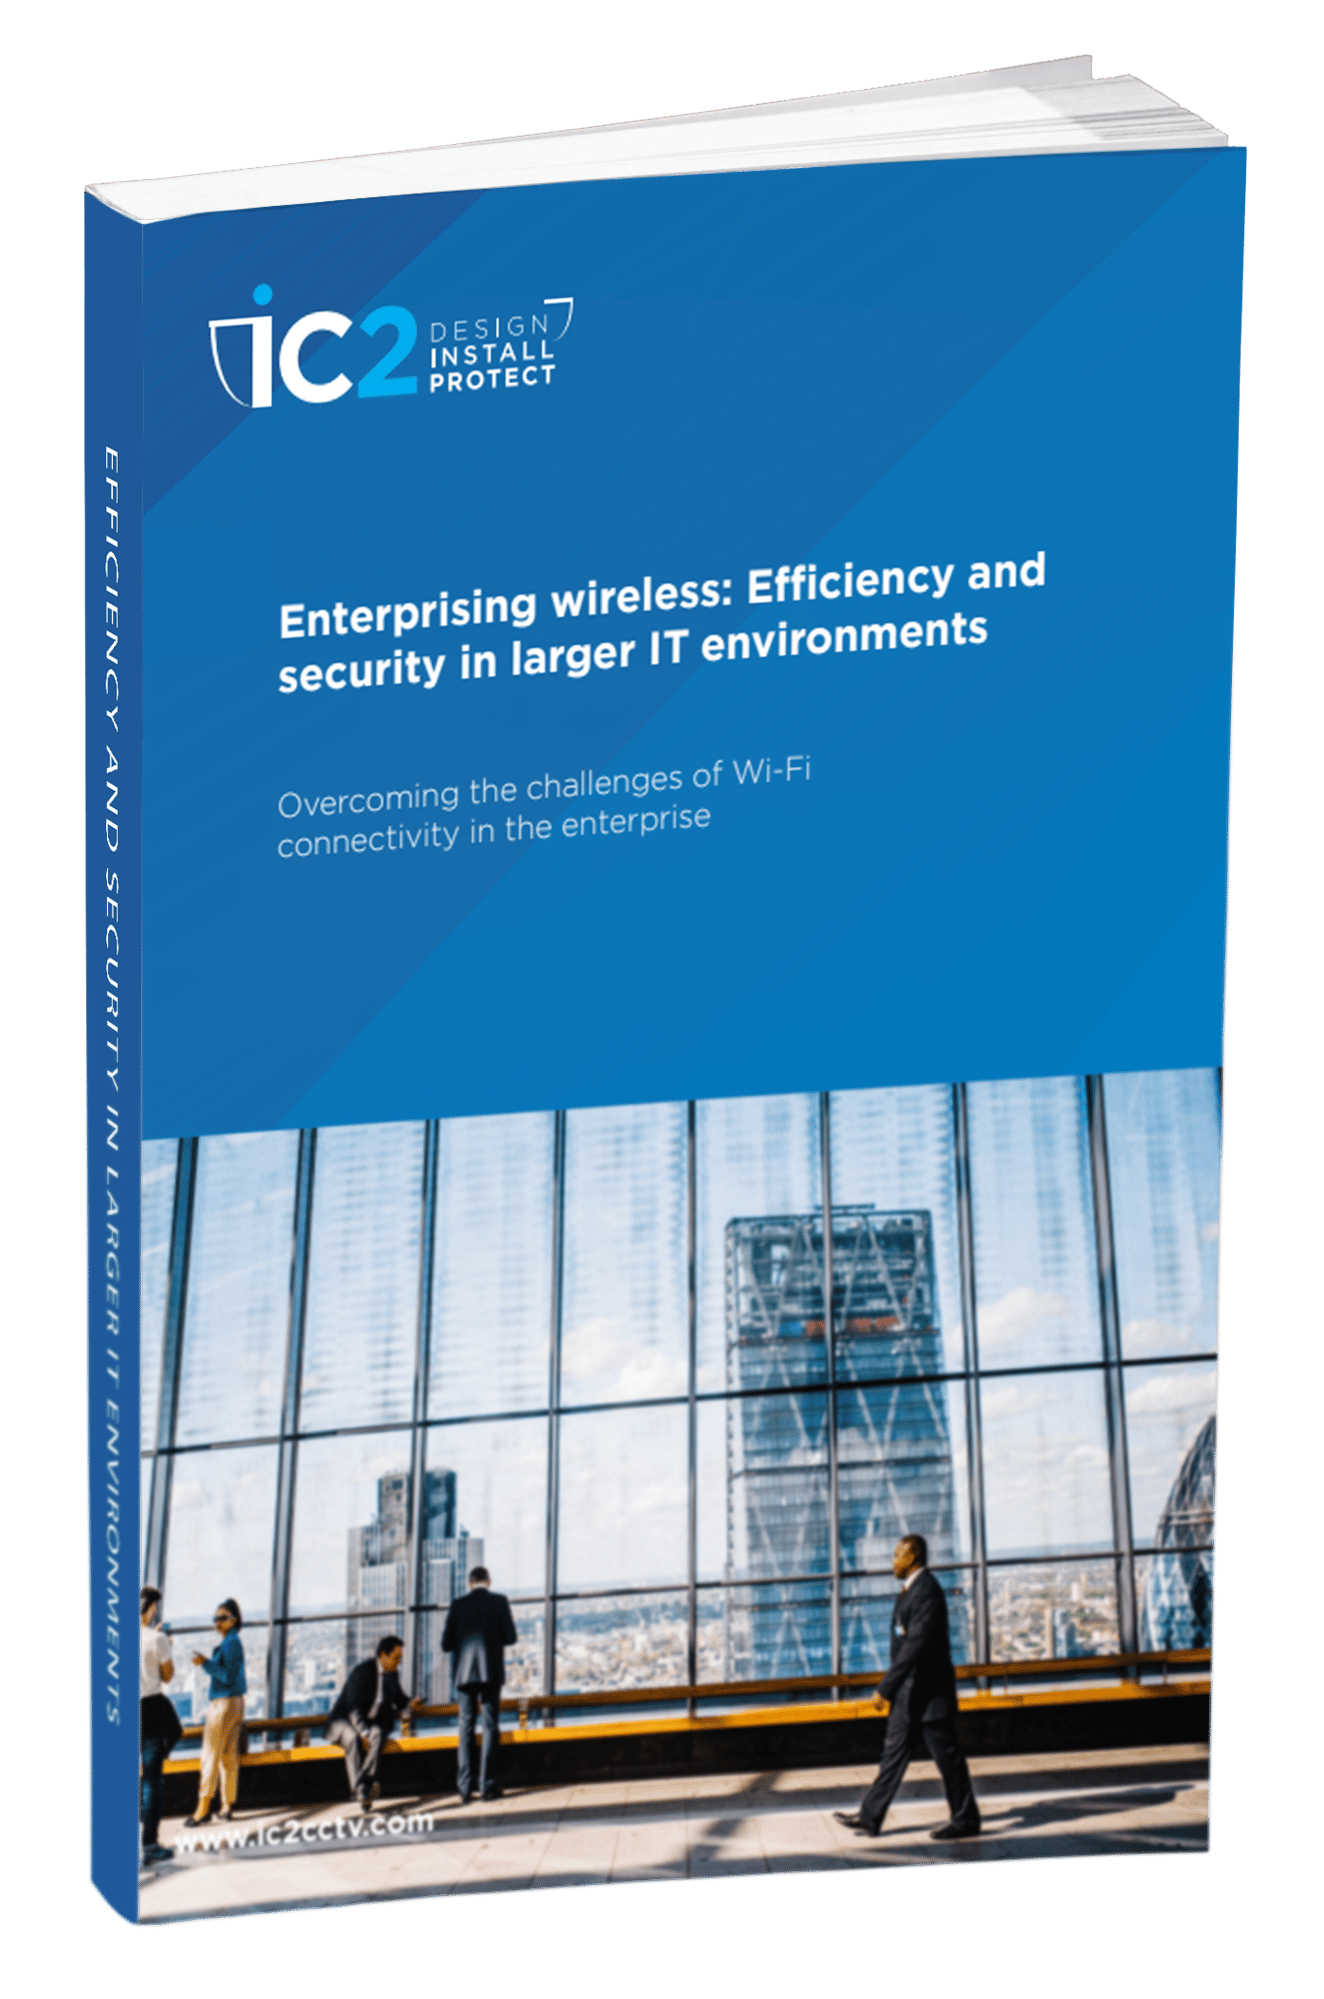 Efficiency And Security In LArger IT Environments Ebook Cover Guide